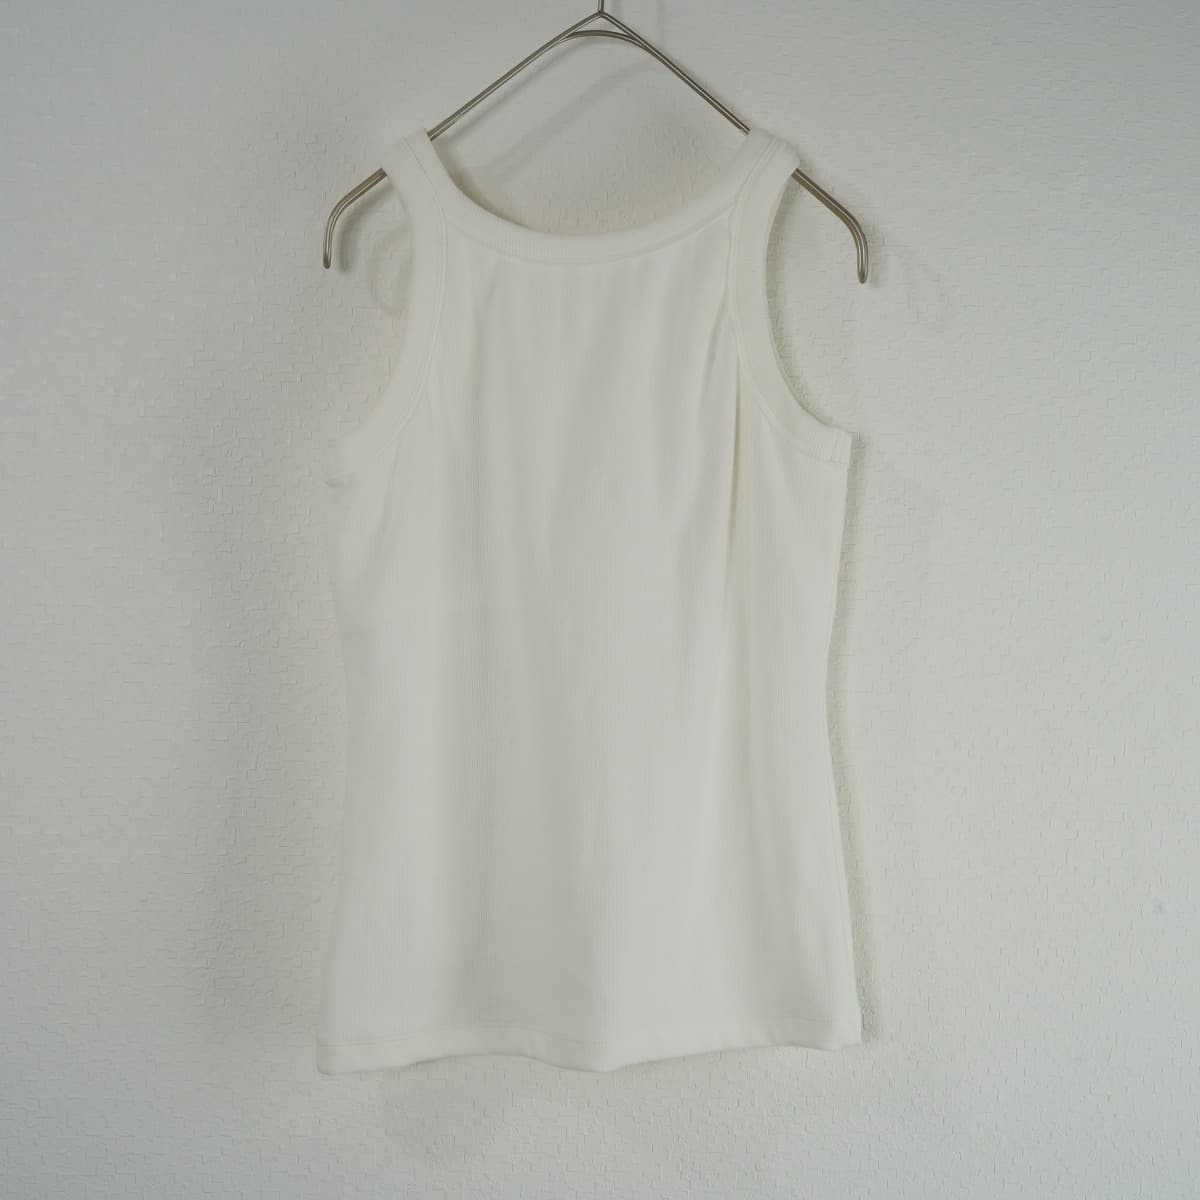 23SS AMERI Ame liDOUBLE TAG TANK TOP double tag tank top pad attaching tops white 